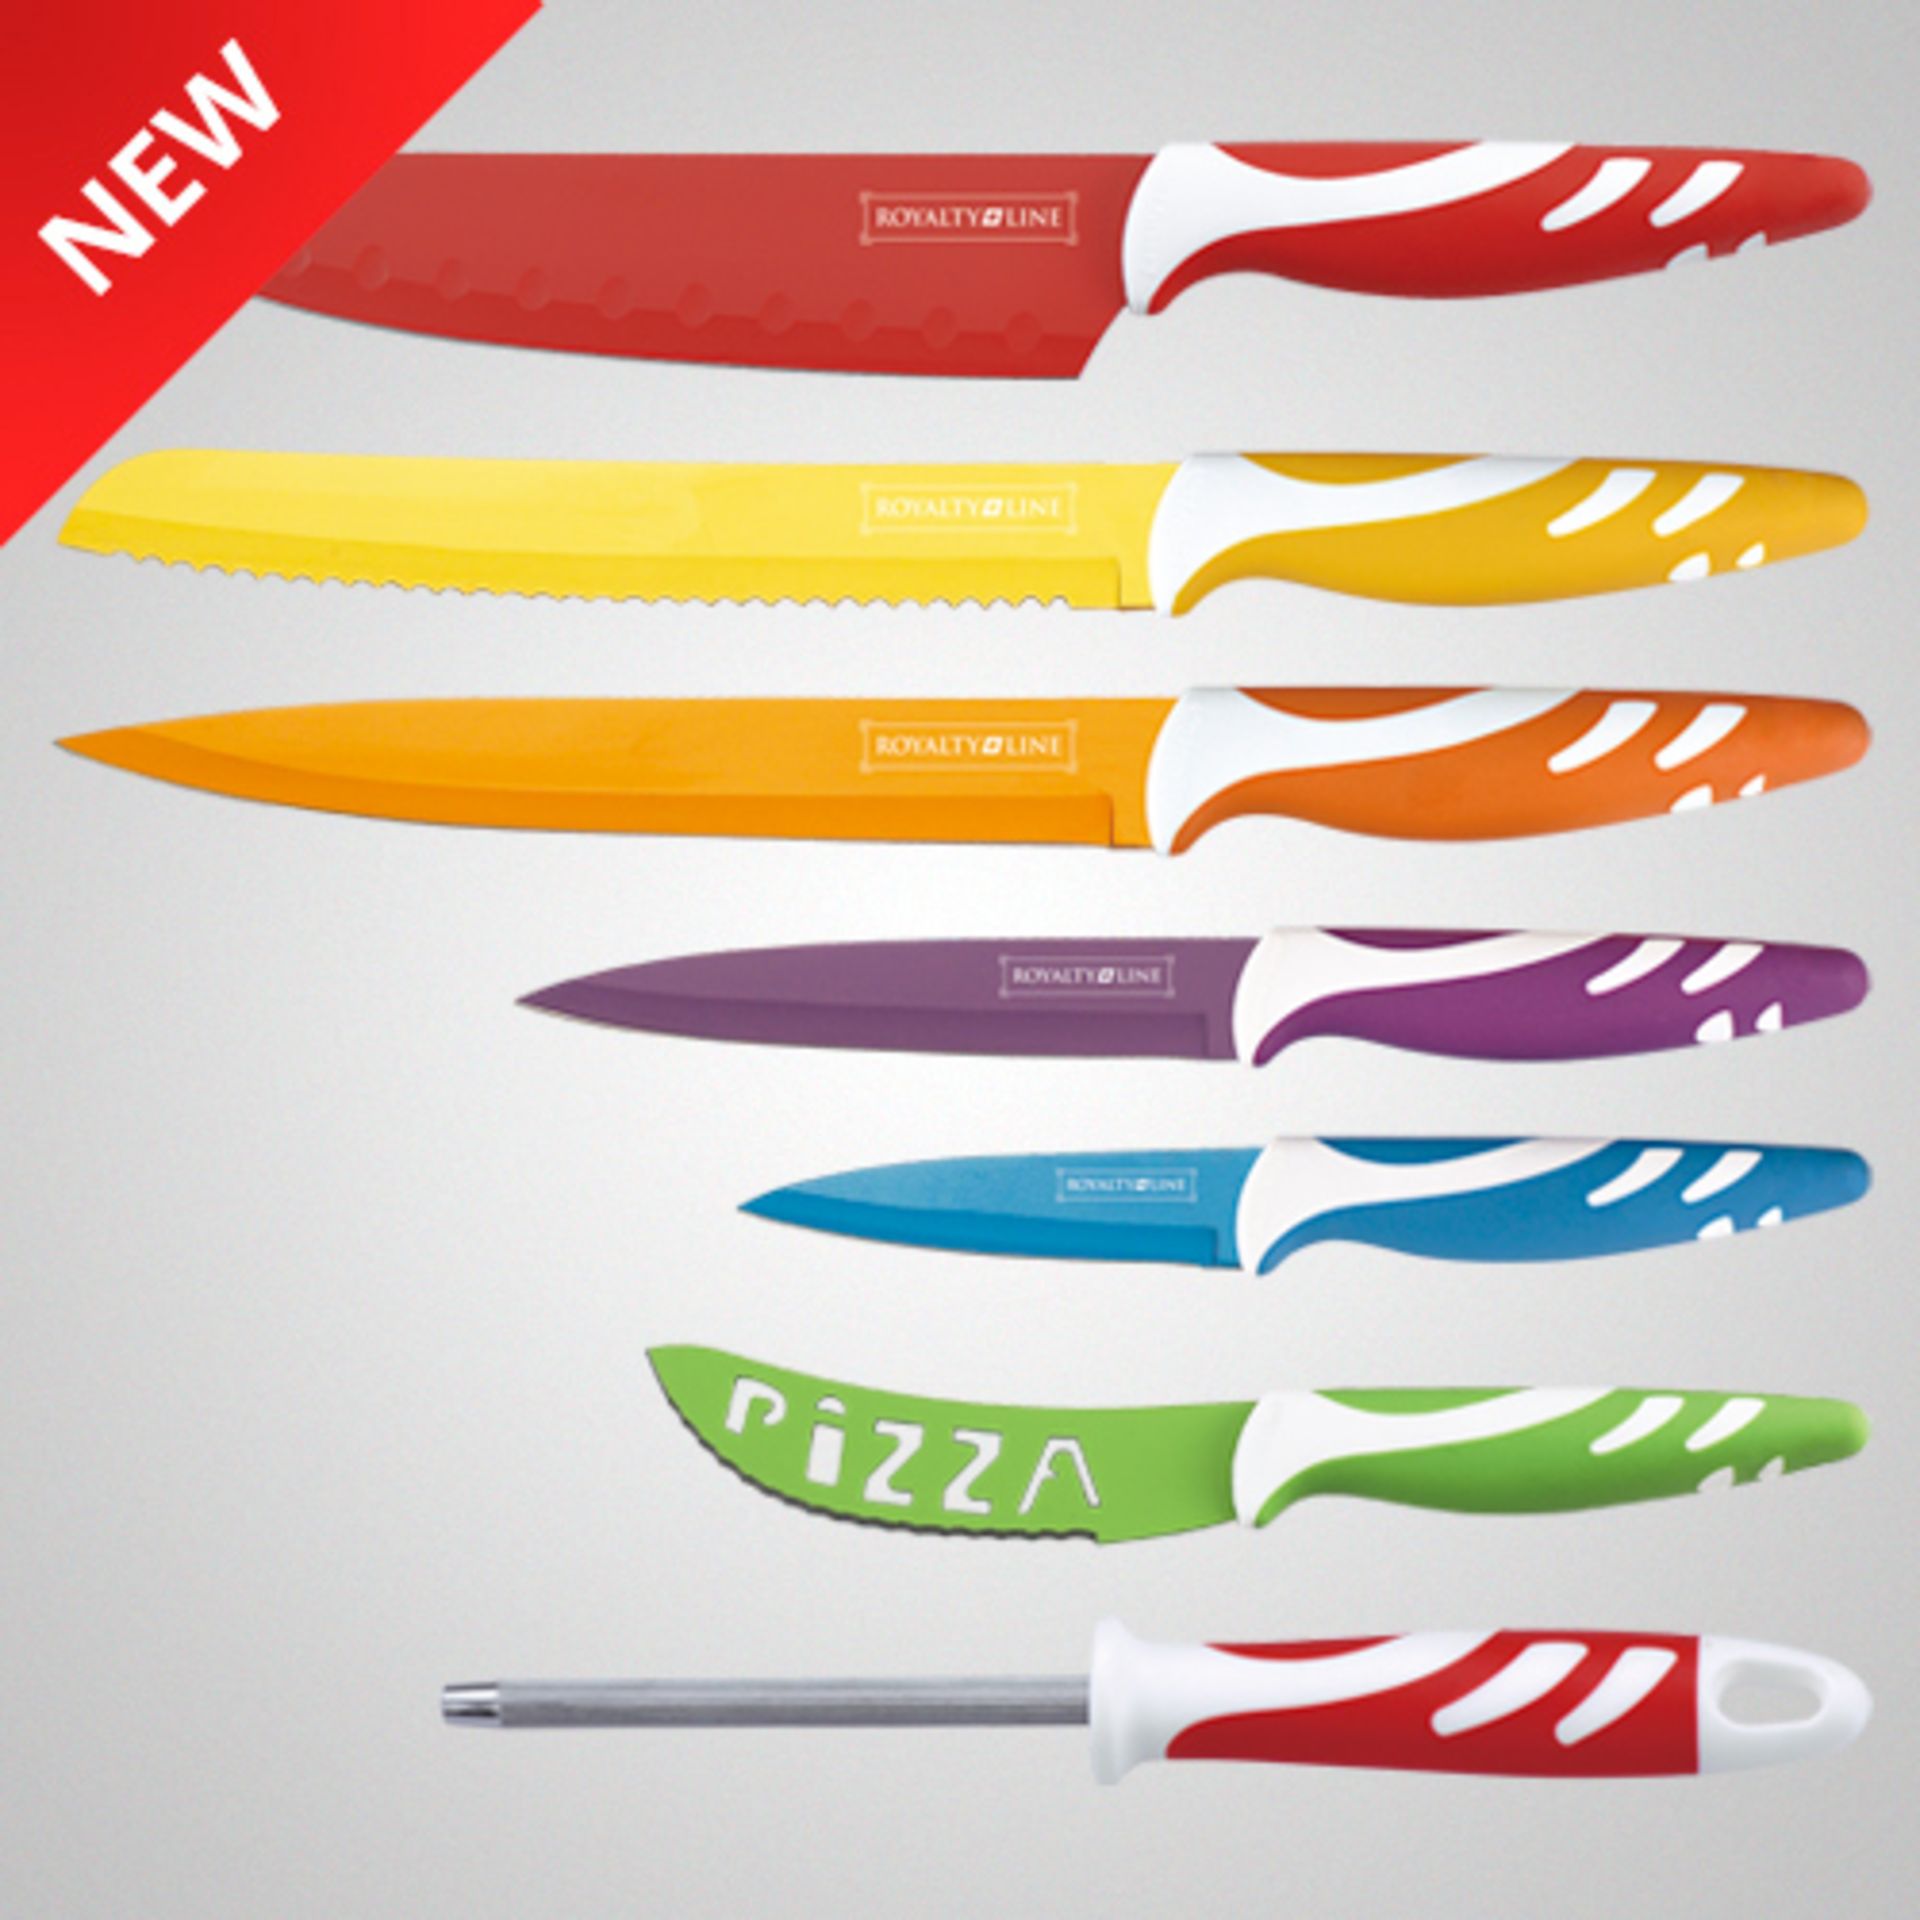 V *TRADE QTY* Brand New 8 Piece Non-Stick Coated Coloured Knife Set RRP169.00 Euros X 10 YOUR BID